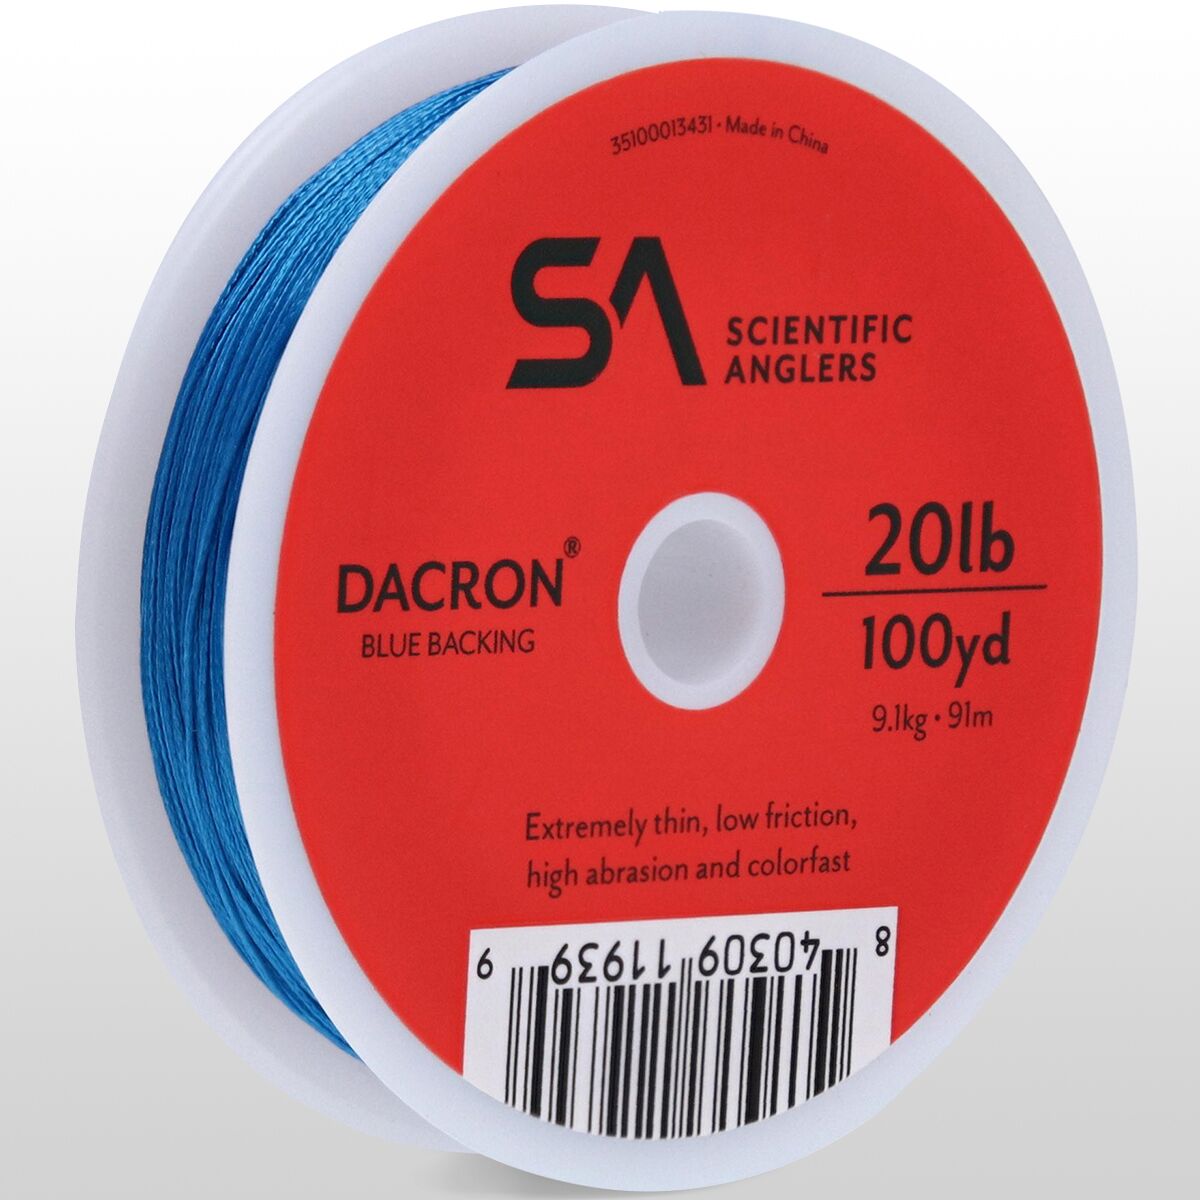 Scientific Anglers Dacron Backing 100yds in Blue 20lb